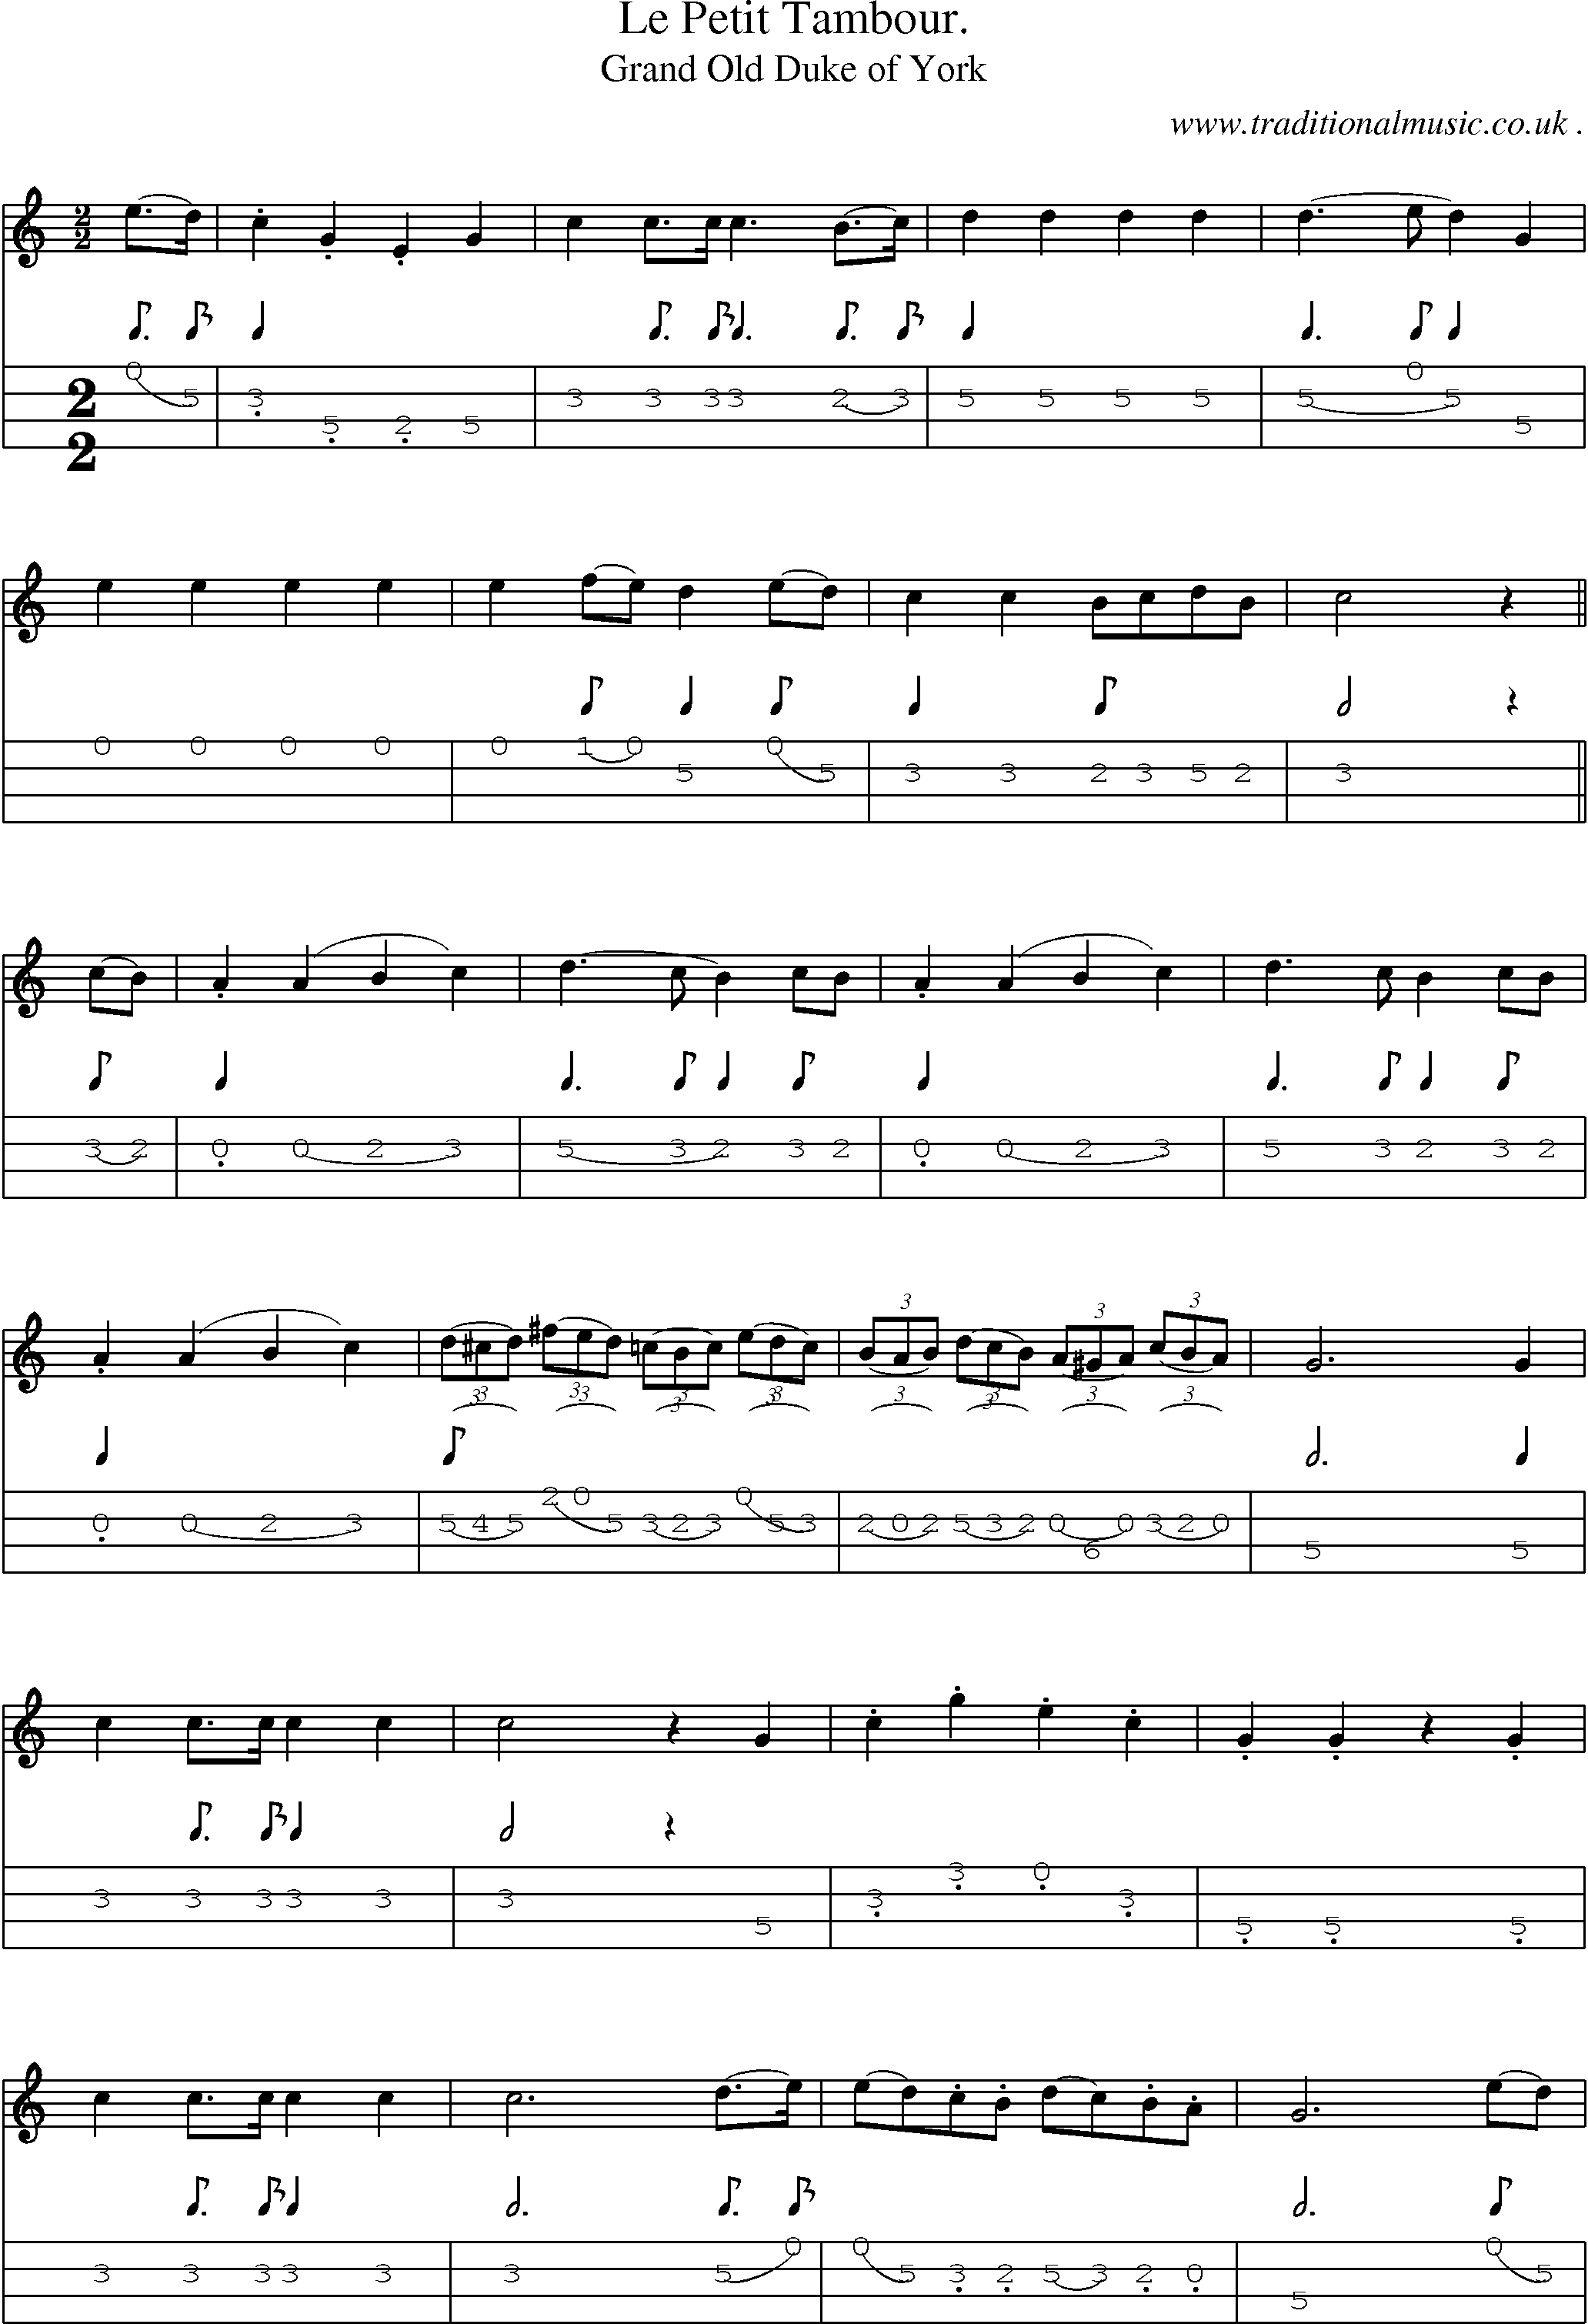 Sheet-Music and Mandolin Tabs for Le Petit Tambour